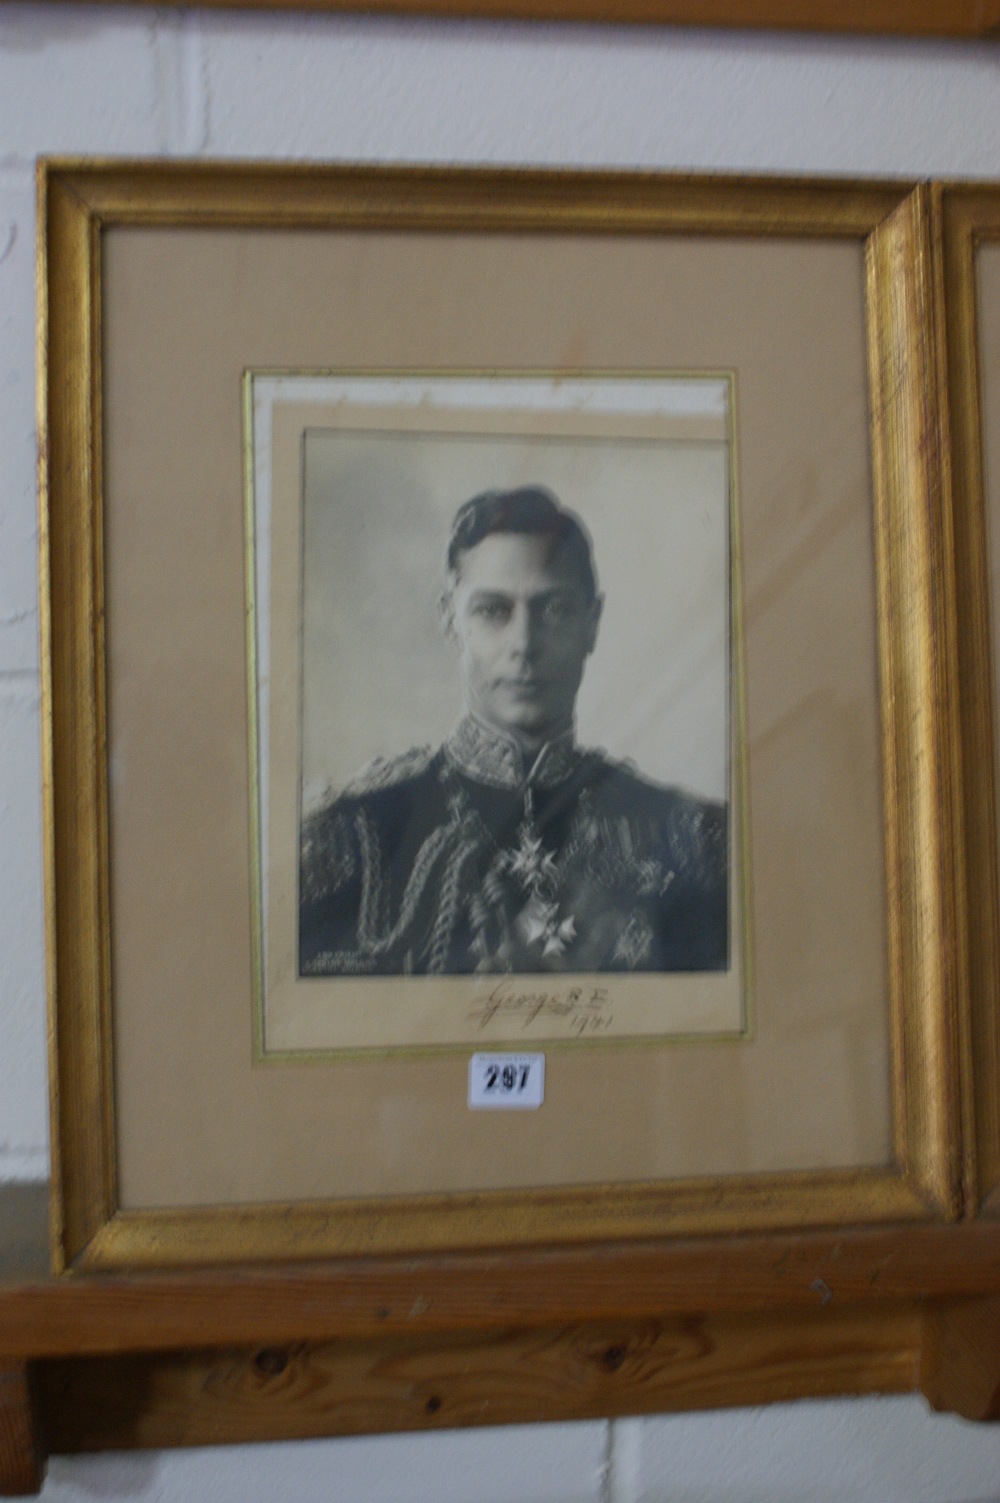 A Framed Wilding Photograph Of King George VI, Signed And Dated 1941